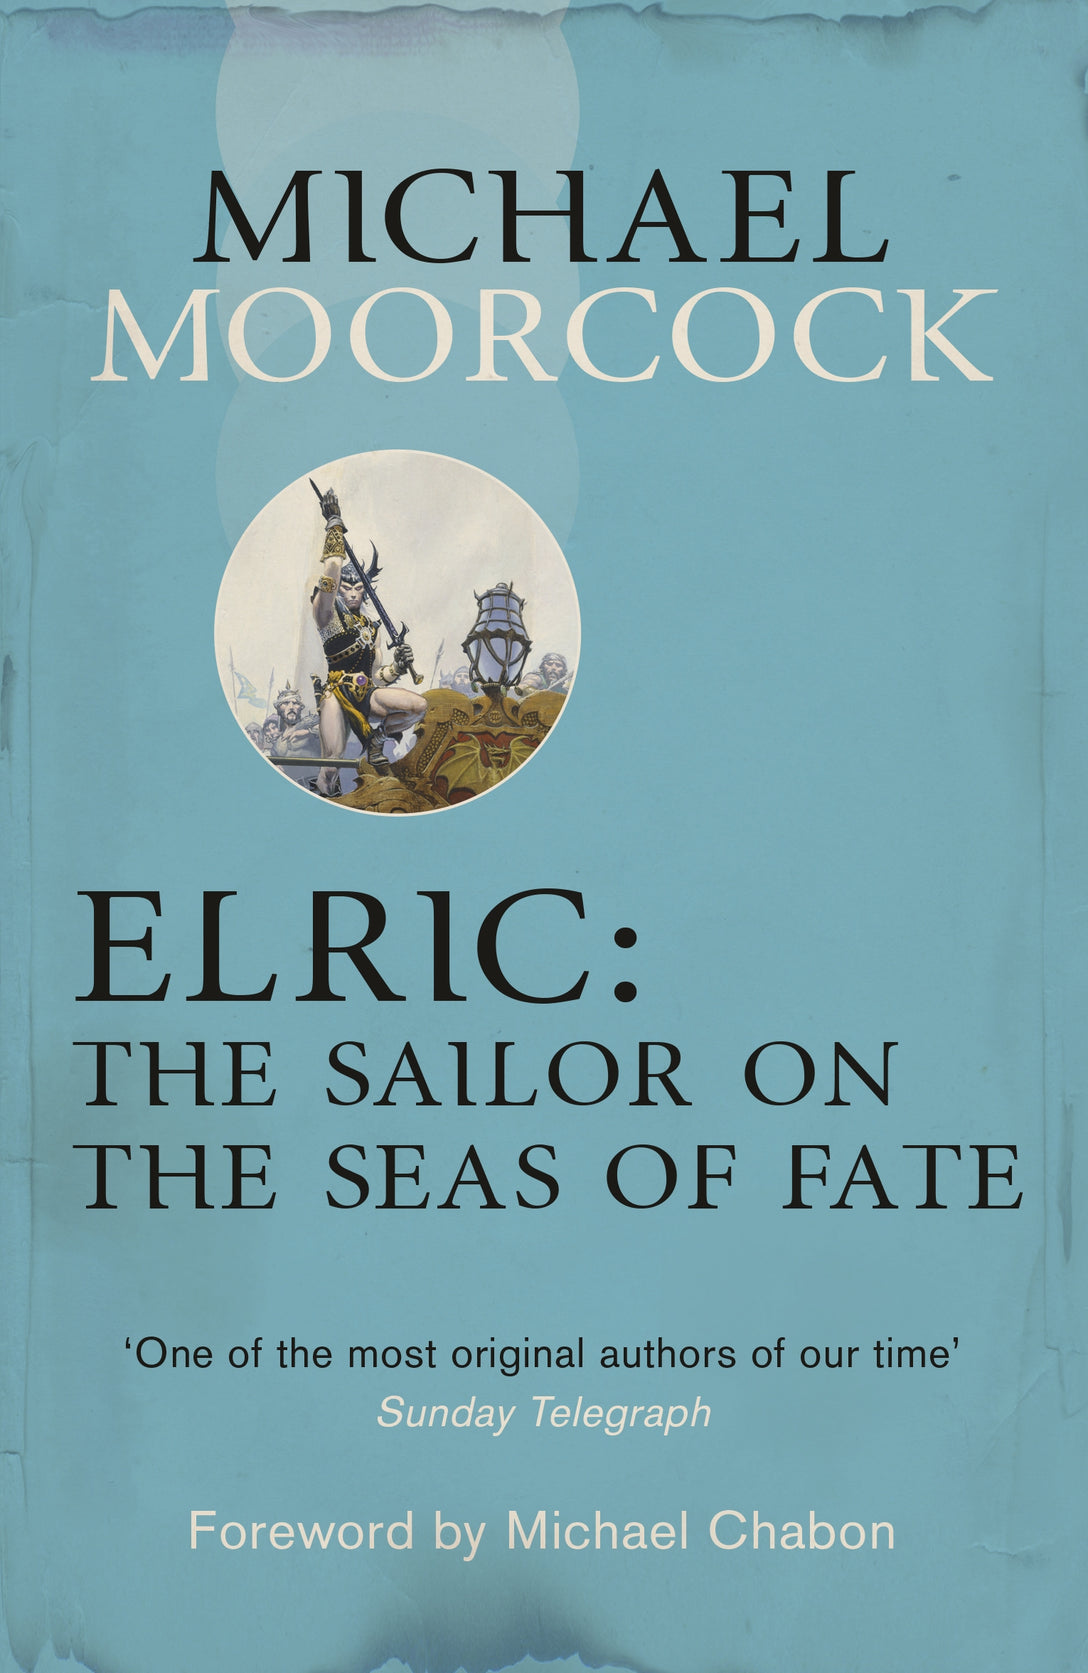 Elric: The Sailor on the Seas of Fate by Michael Moorcock